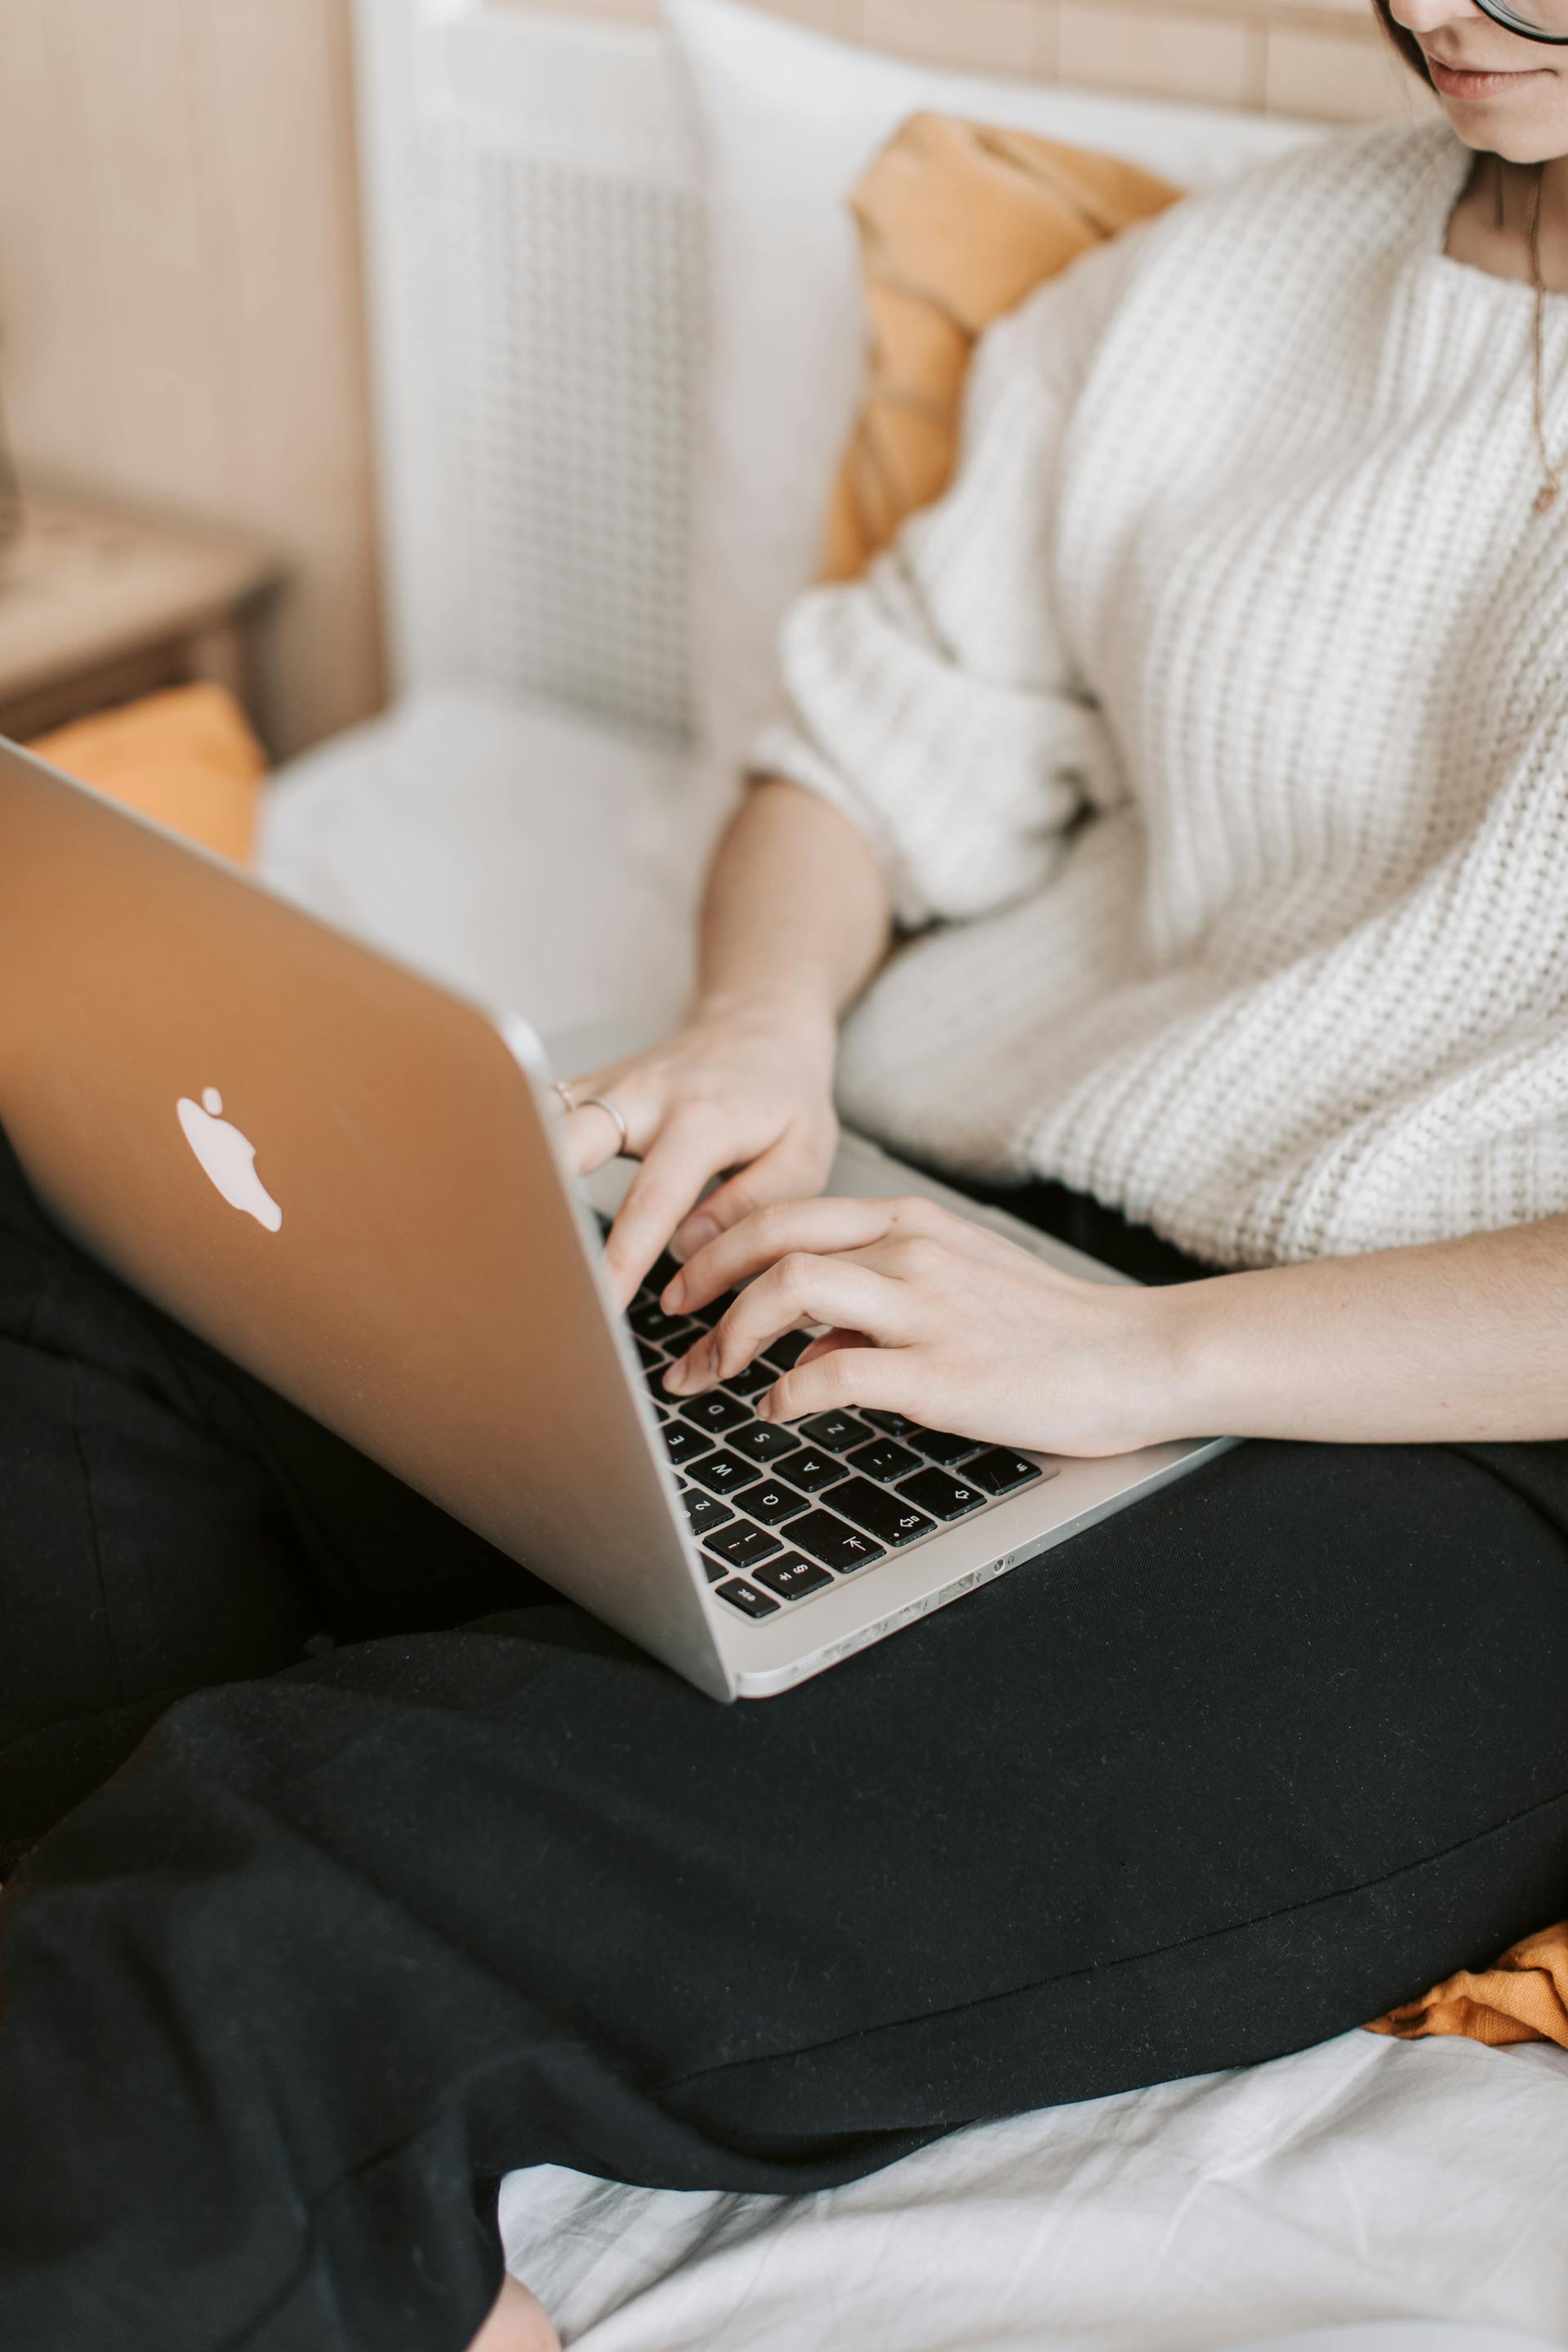 A person using their laptop in bed | Source: Pexels